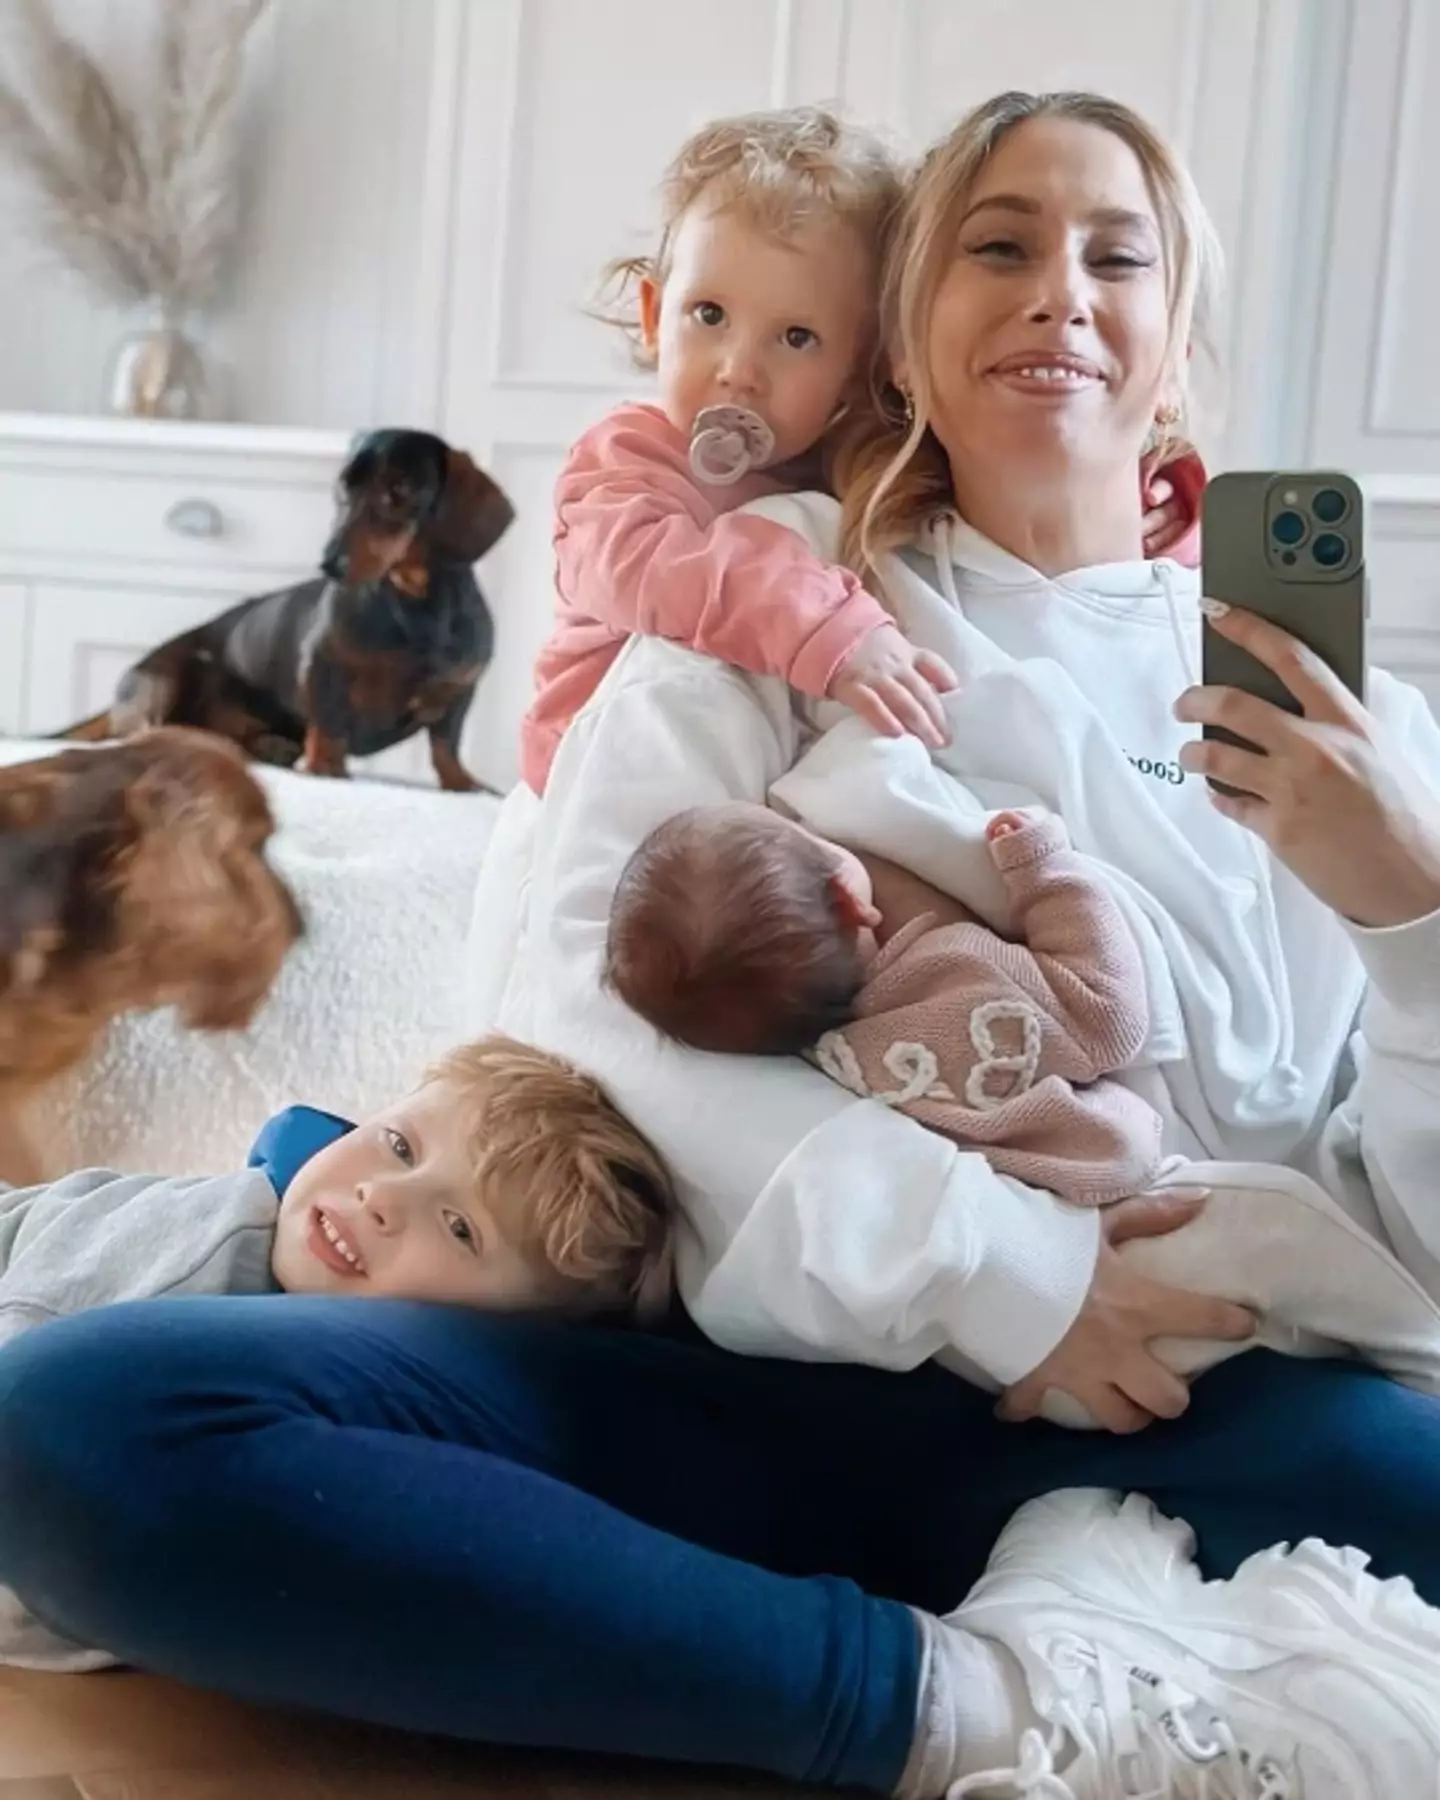 Mother-of-five Stacey Solomon has celebrated 'smashing' life as a mum after worrying she’s been doing a 'rubbish' job.